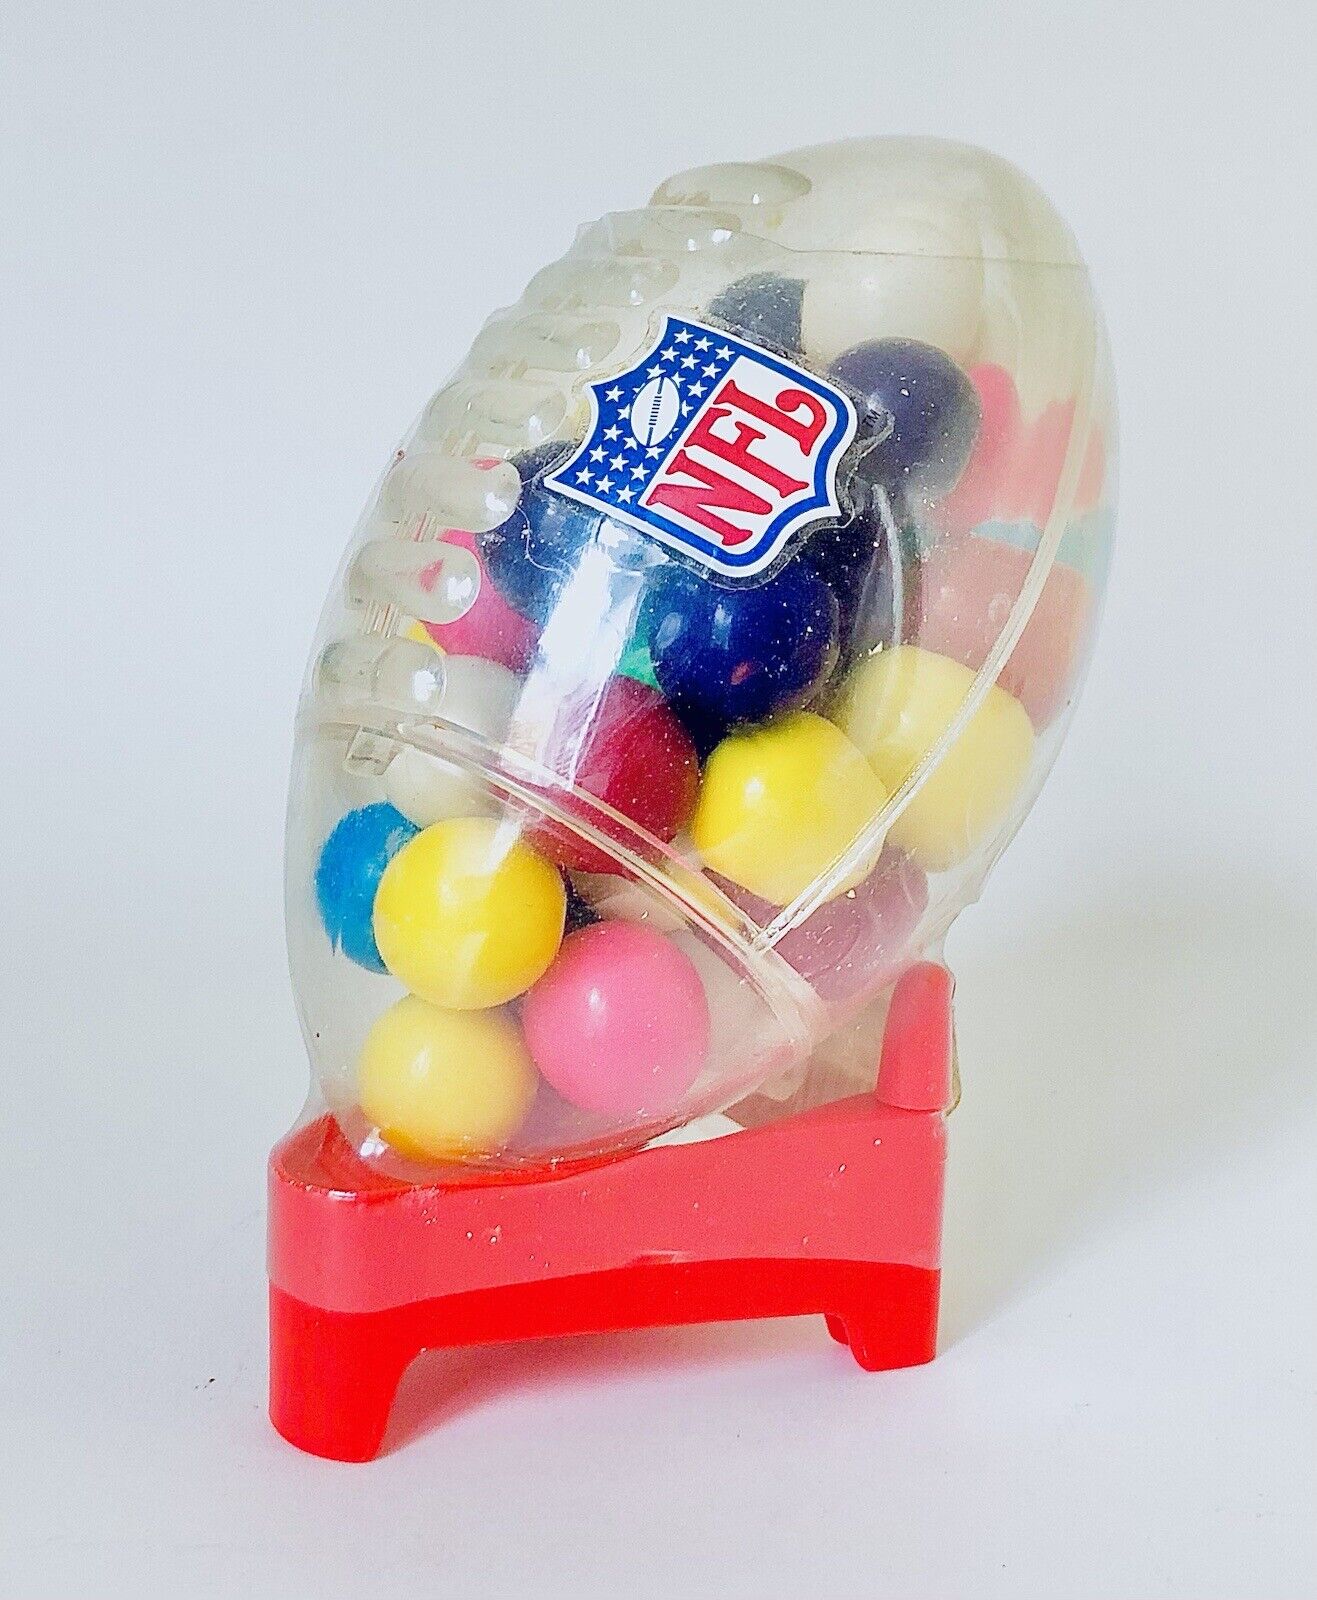 Vintage 1997 Treasure Chest Co NFL MINI FOOTBALL 4” Gumball Bubble Gum Container